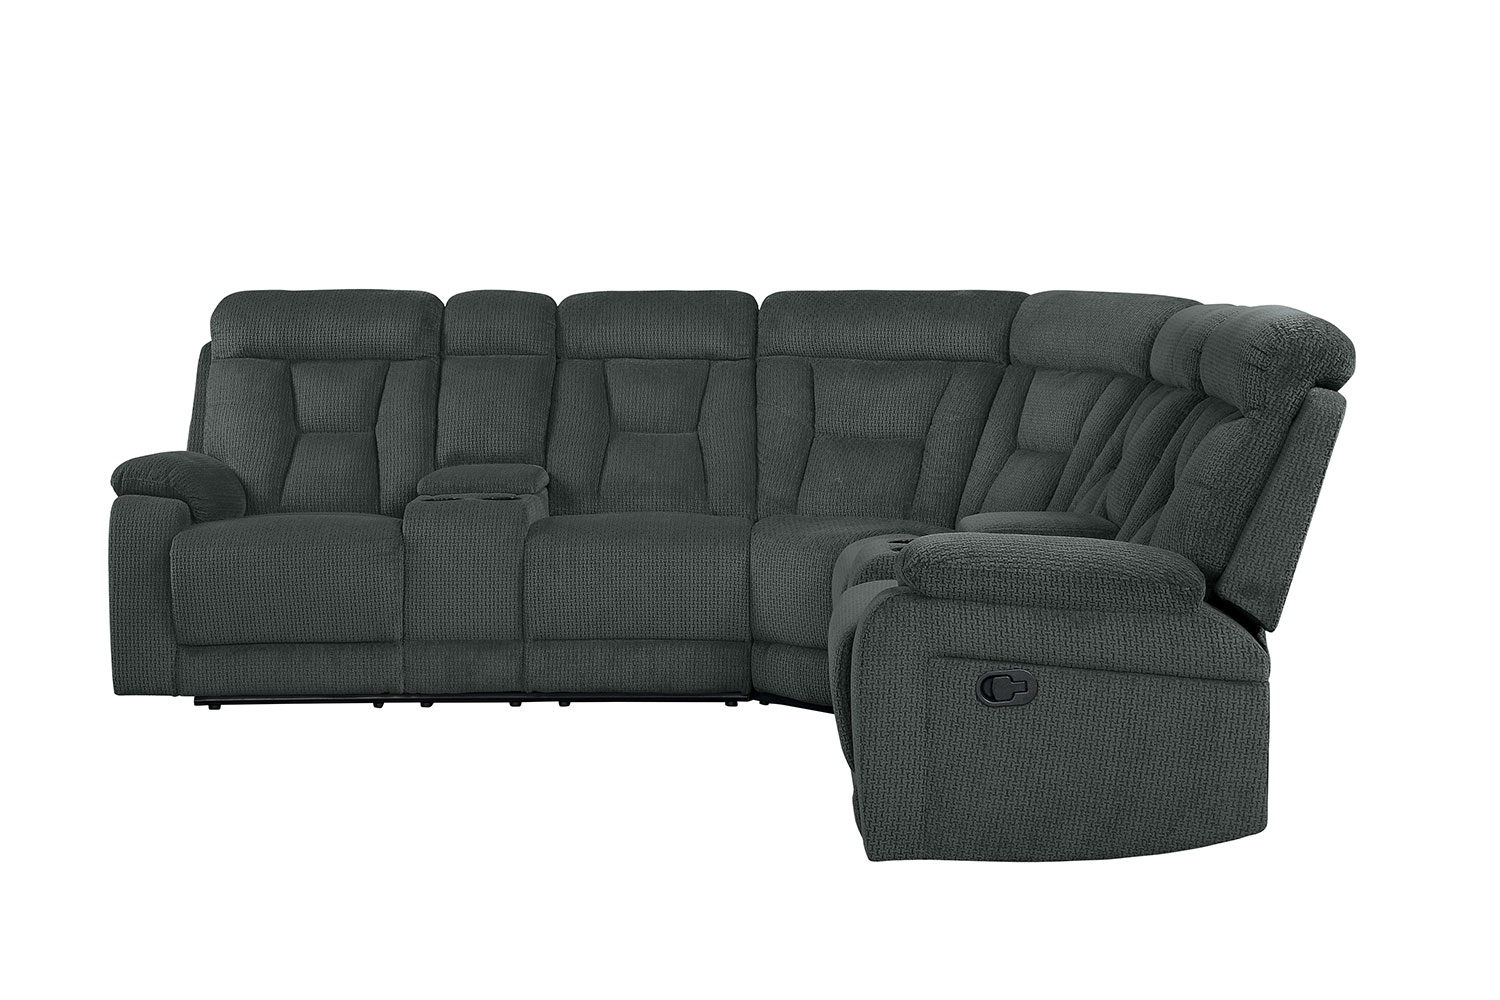 Homelegance Rosnay Reclining Sectional Sofa - Gray